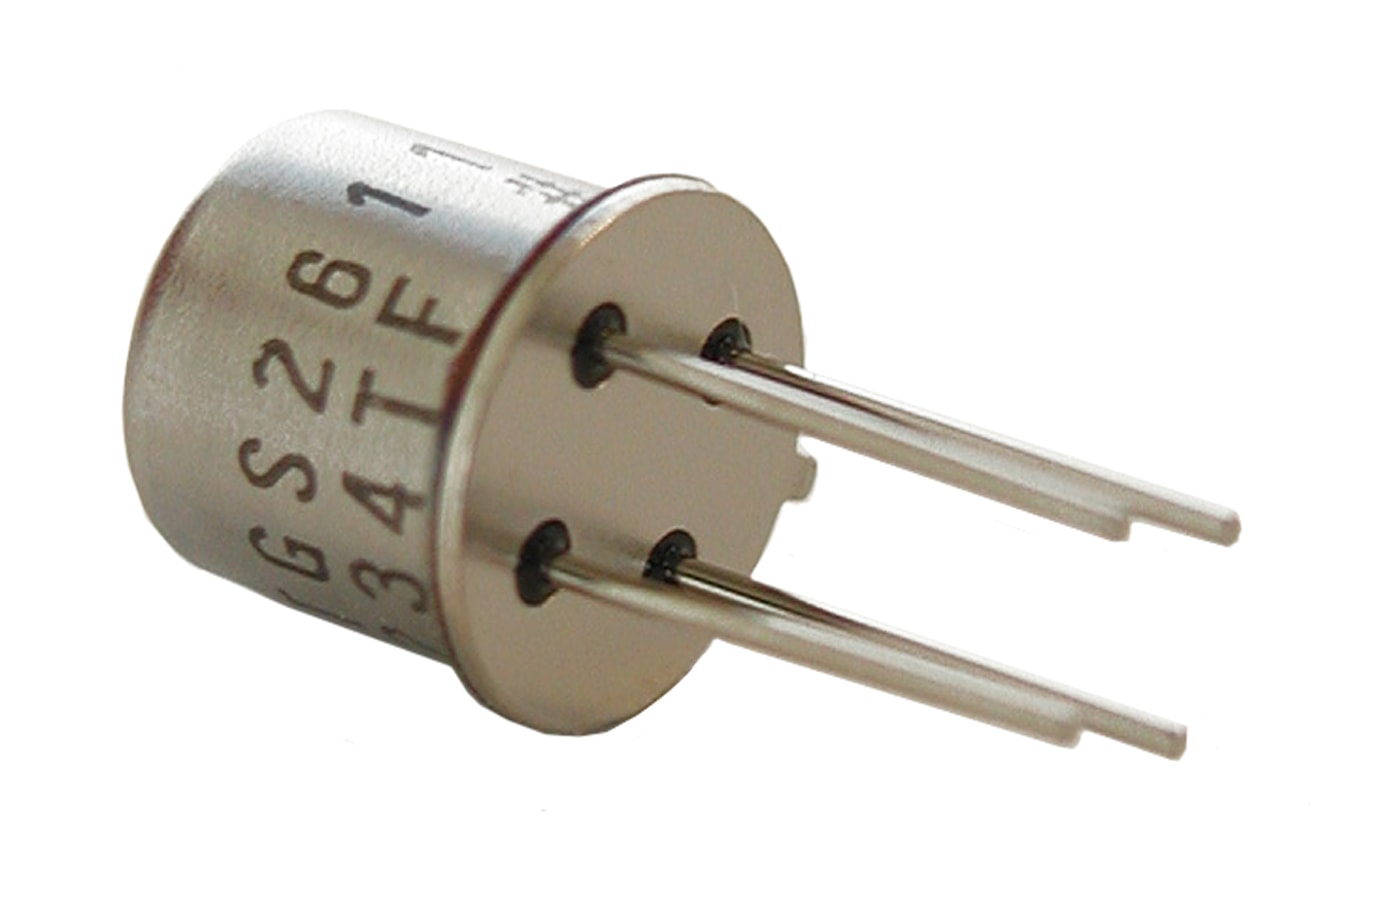 A739 Replacement Sensor for 719, 720b, 721 & 775